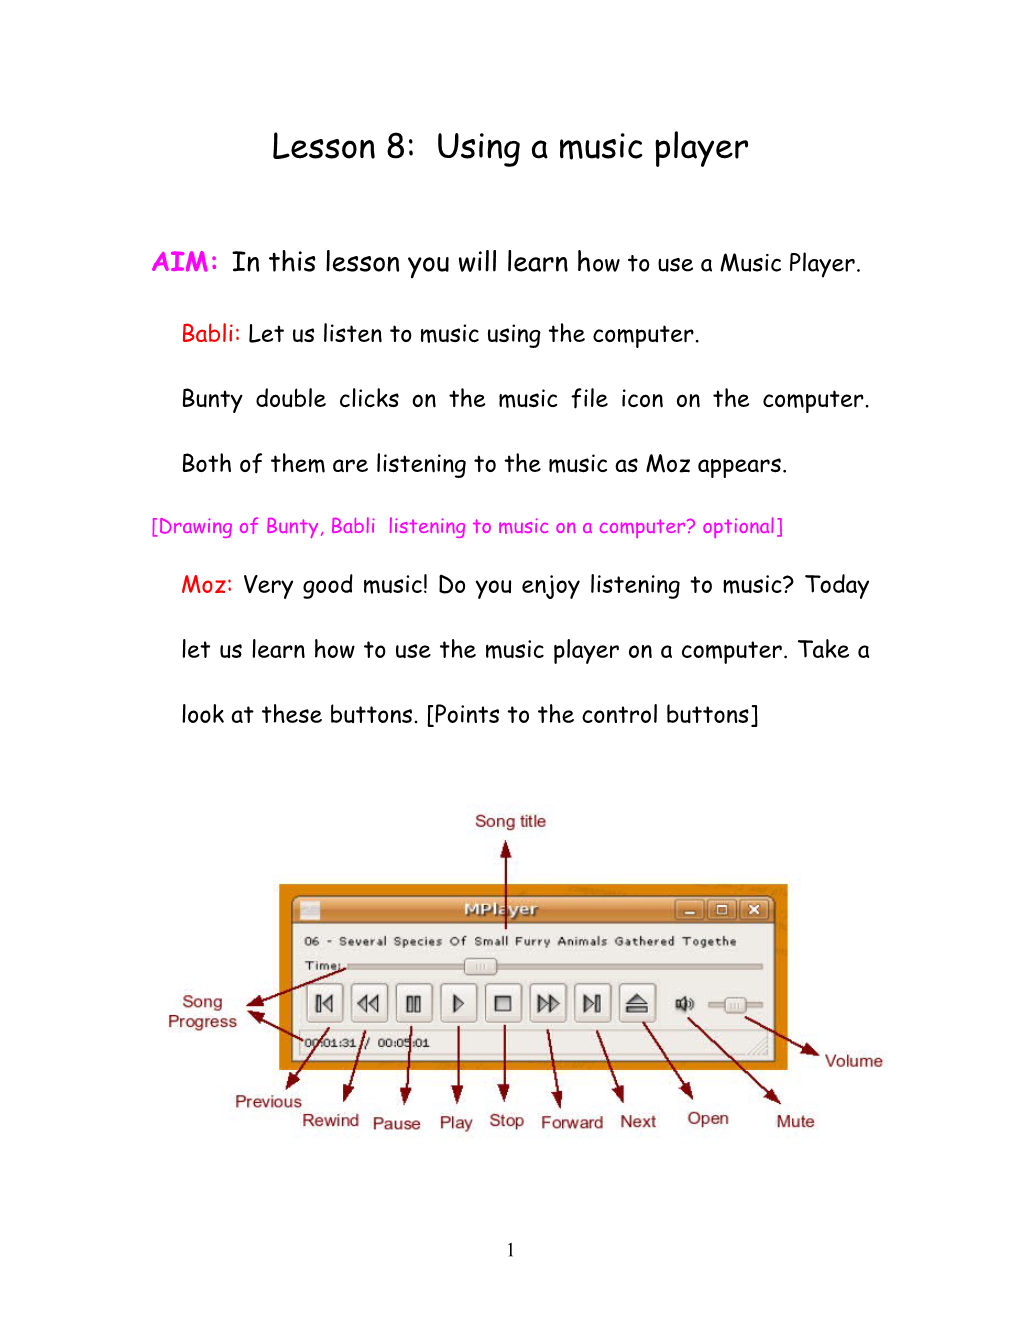 AIM: Inthis Lesson You Will Learn How to Use a Music Player